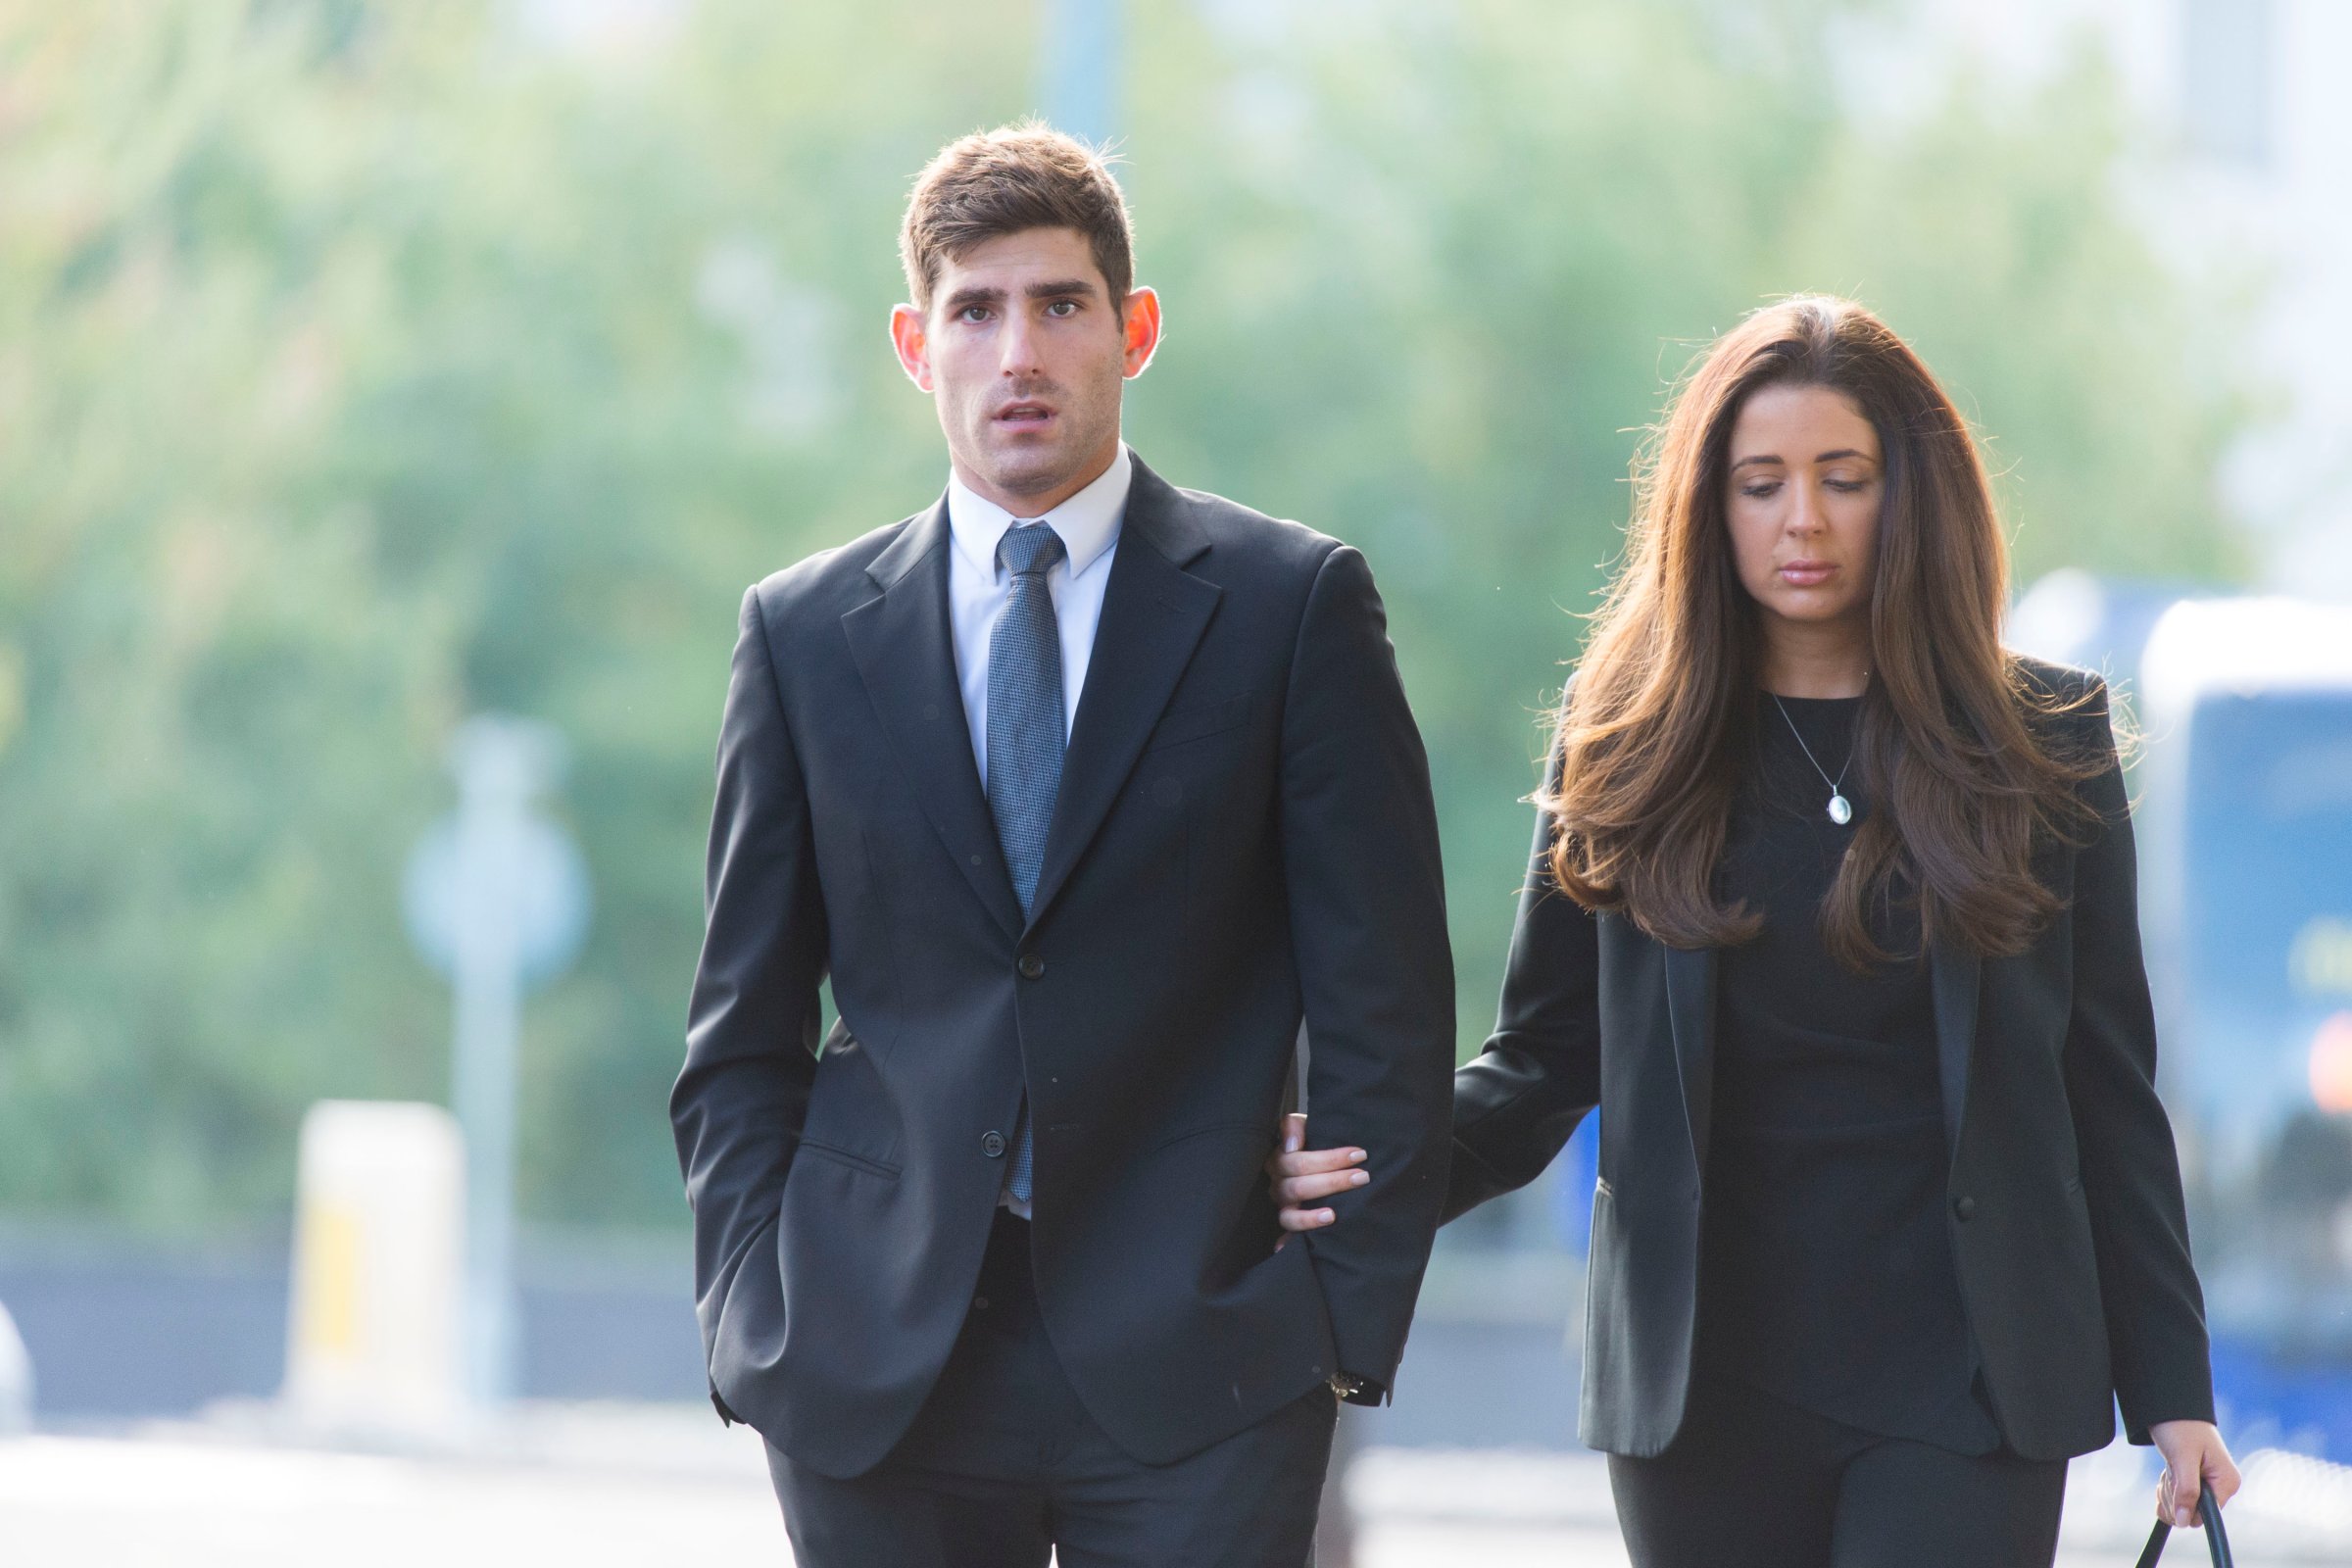 Footballer Ched Evans Arrives At Court For His Retrial On Rape Charges